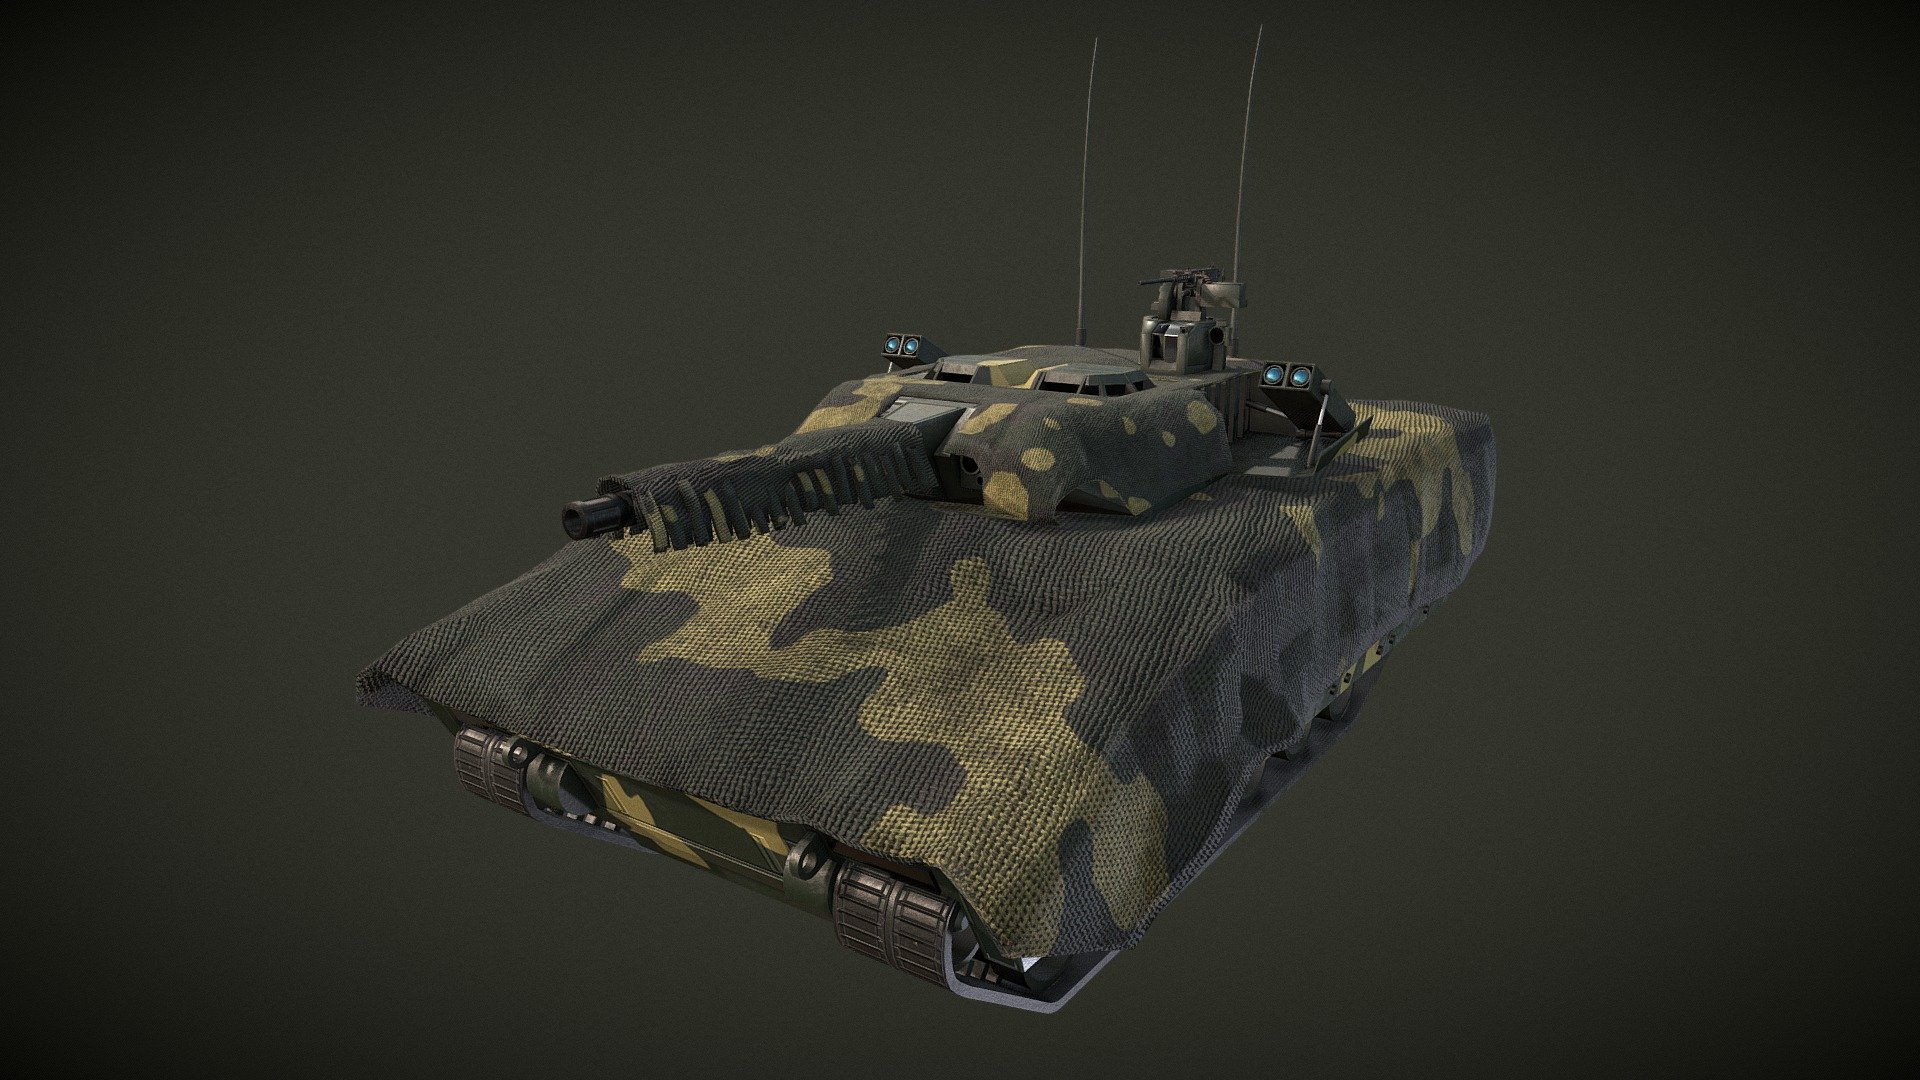 K41 Lynx IFV APC Tank- Armor Model/Texture work by Outworld Studios

Must give credit to Outworld Studios if using this asset

Show support by joining my discord: https://discord.gg/EgWSkp8Cxn - German Rheinmetall K41 Lynx IFV APC Tank Camo - Buy Royalty Free 3D model by Outworld Studios (@outworldstudios) 3d model